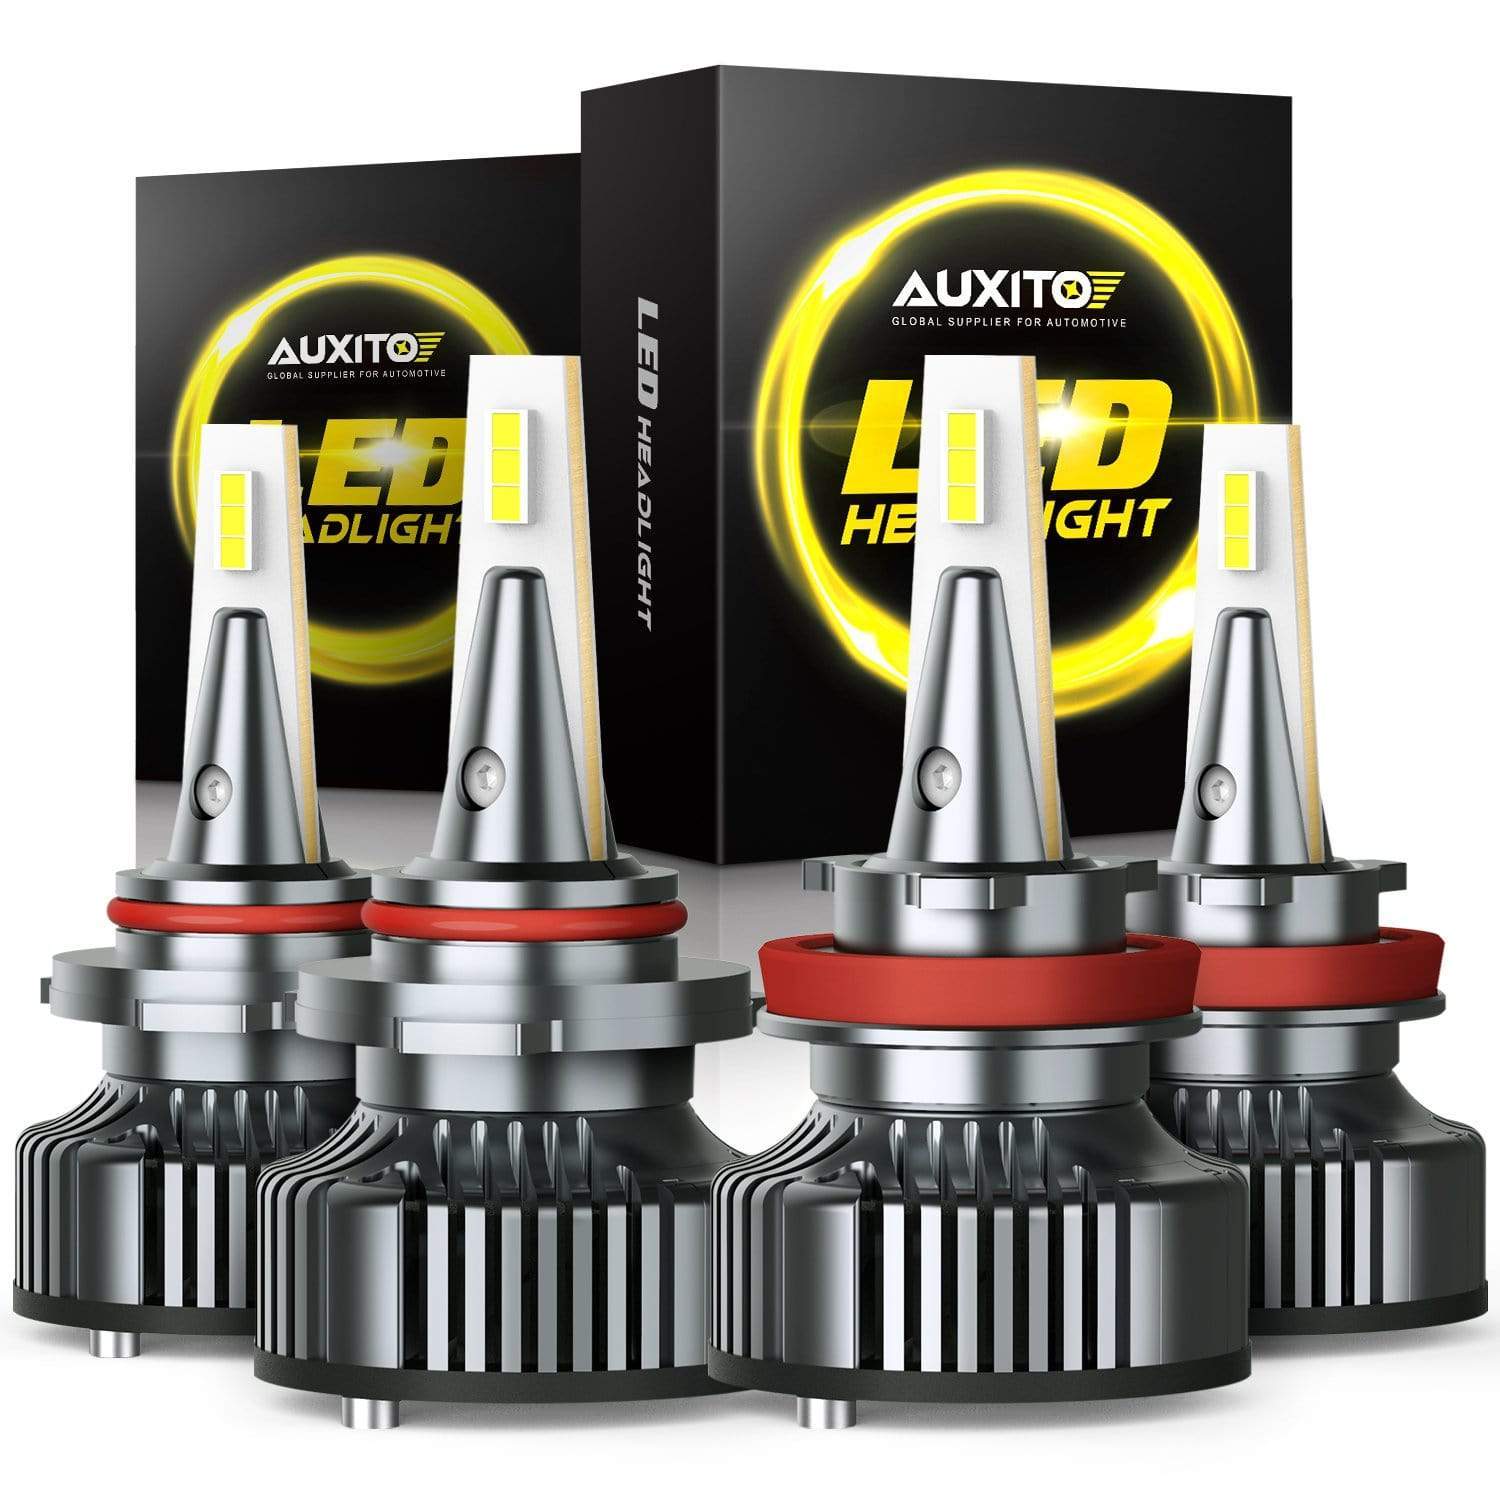 AUXITO 9005 HB3 High Beam and H11 Low Beam LED Bulbs Combo Kit, 400% Times  Brighter, 6500K White, AUXITO